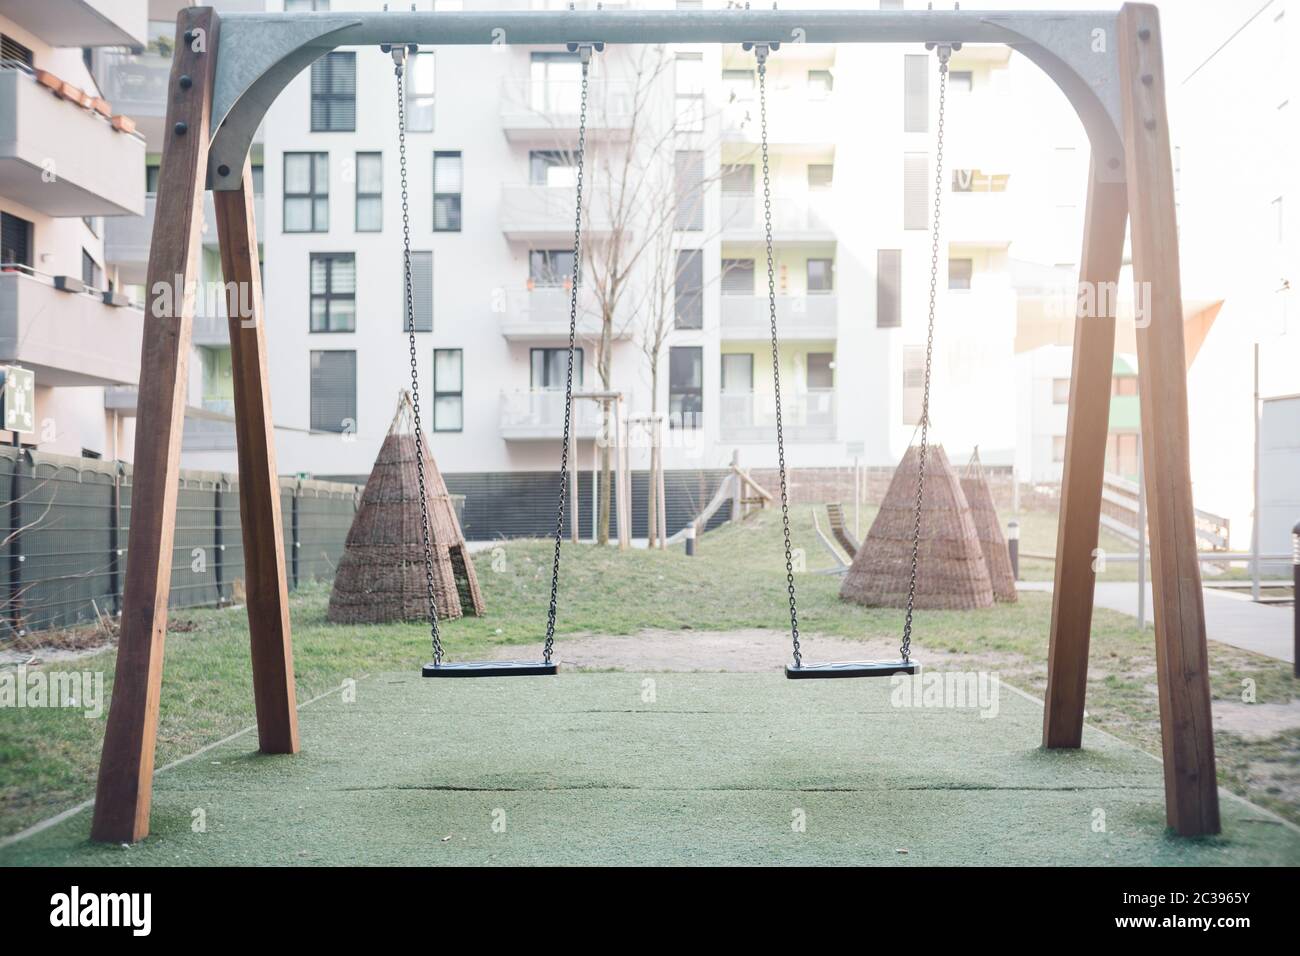 Swing set in a backyard. Childhood and youth memories concept. Stock Photo